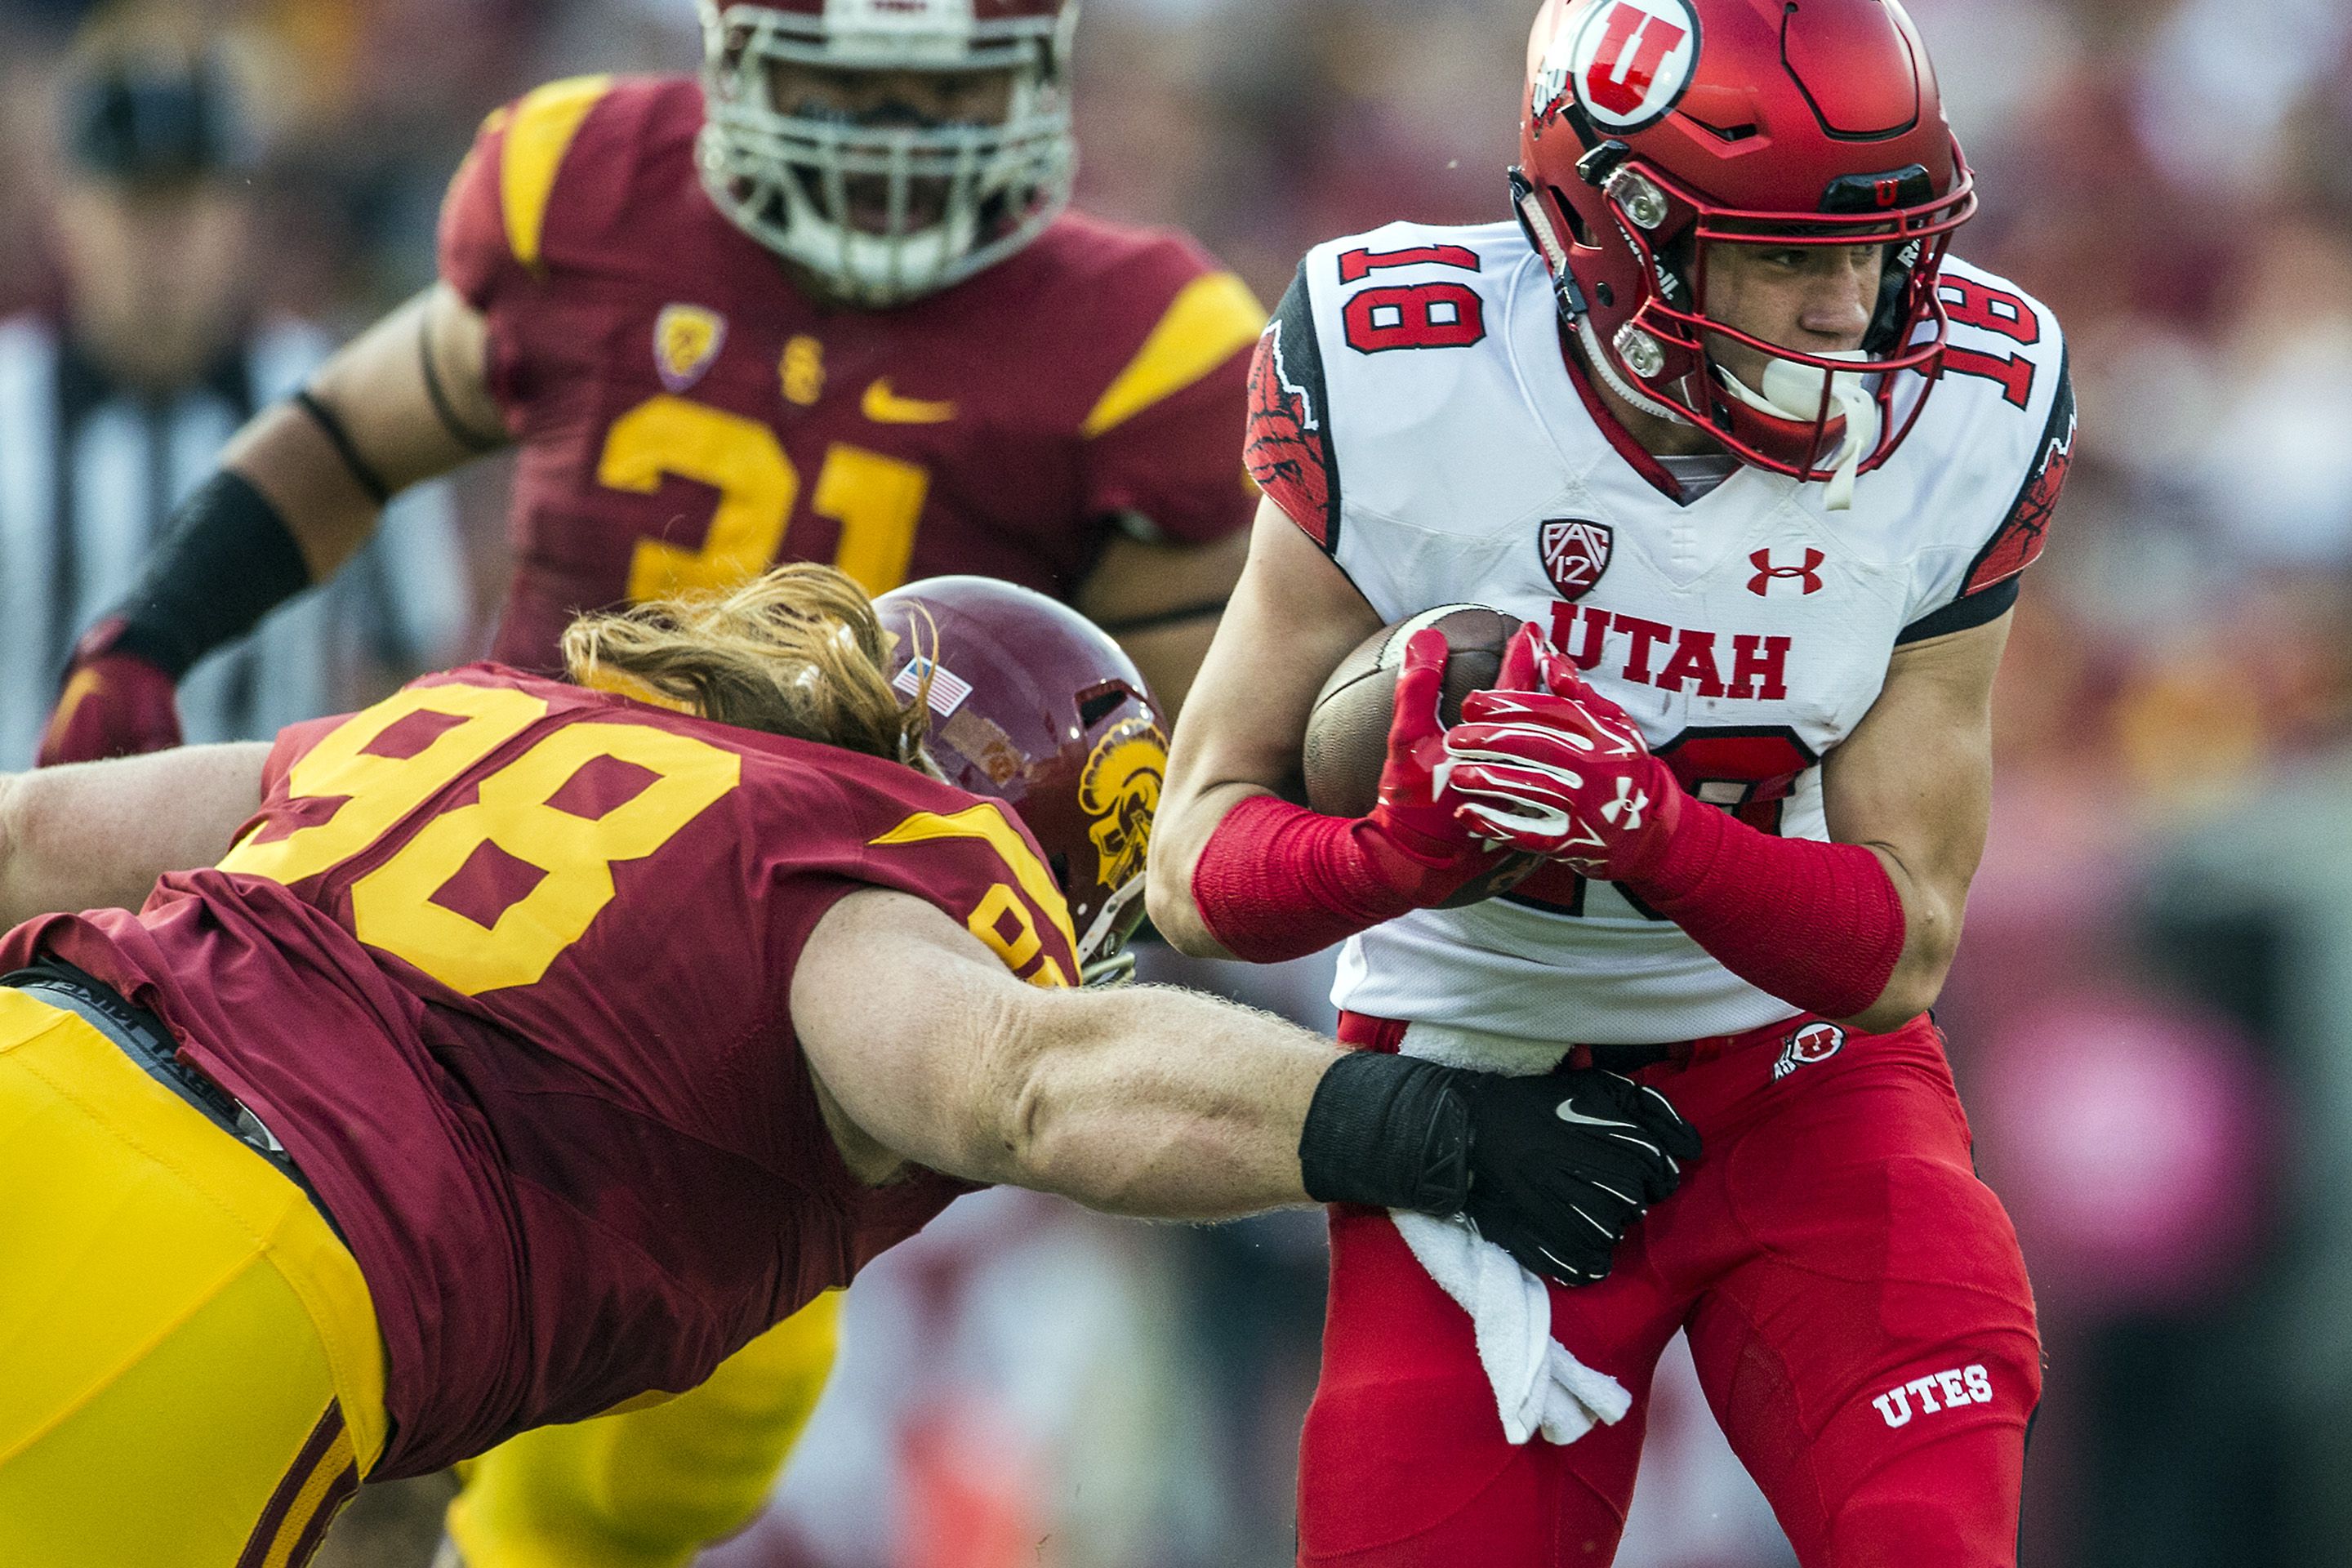 Red All Over: Ute playmaker Britain Covey is back on the field